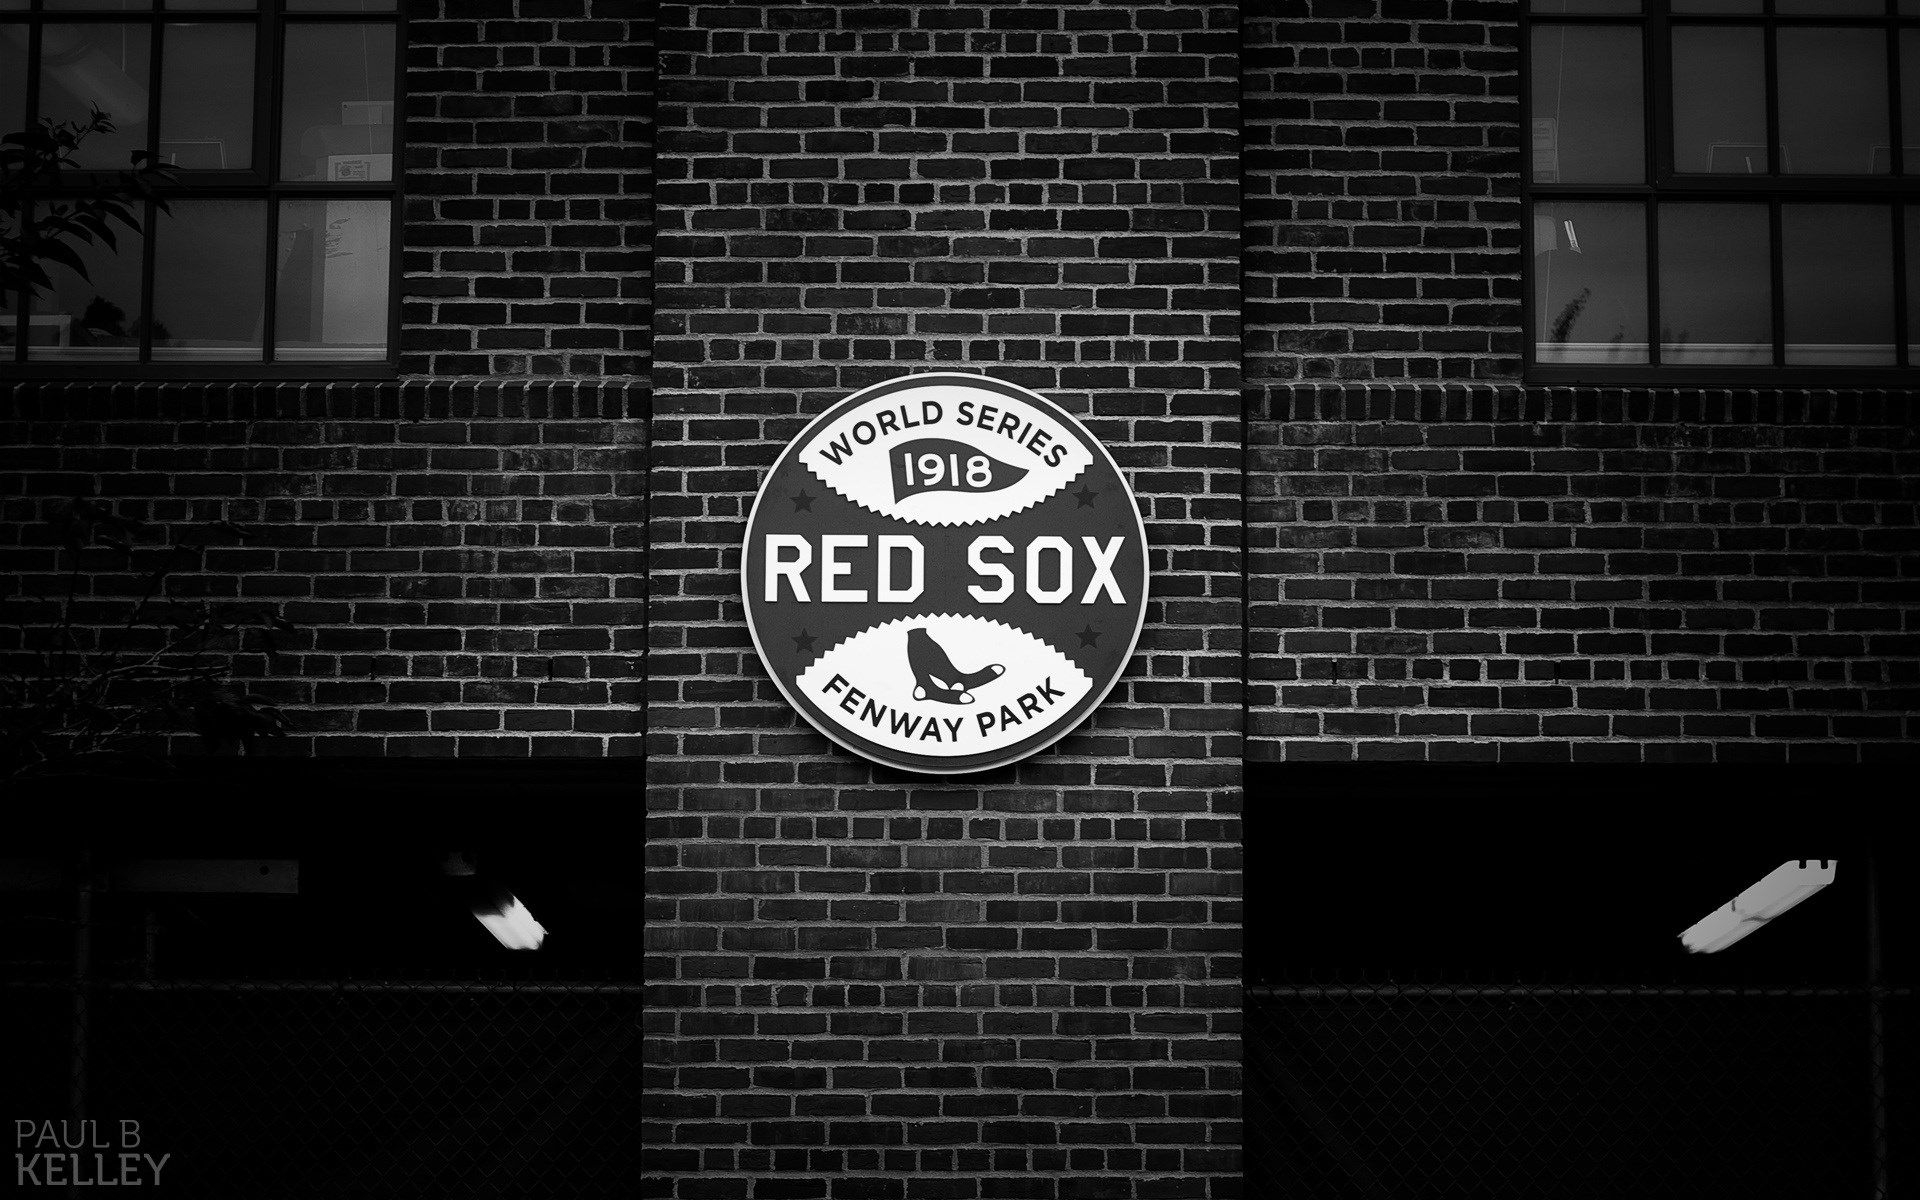 1920x1200 download red sox logo wallpapers | Red sox logo, Boston red sox logo, Red sox